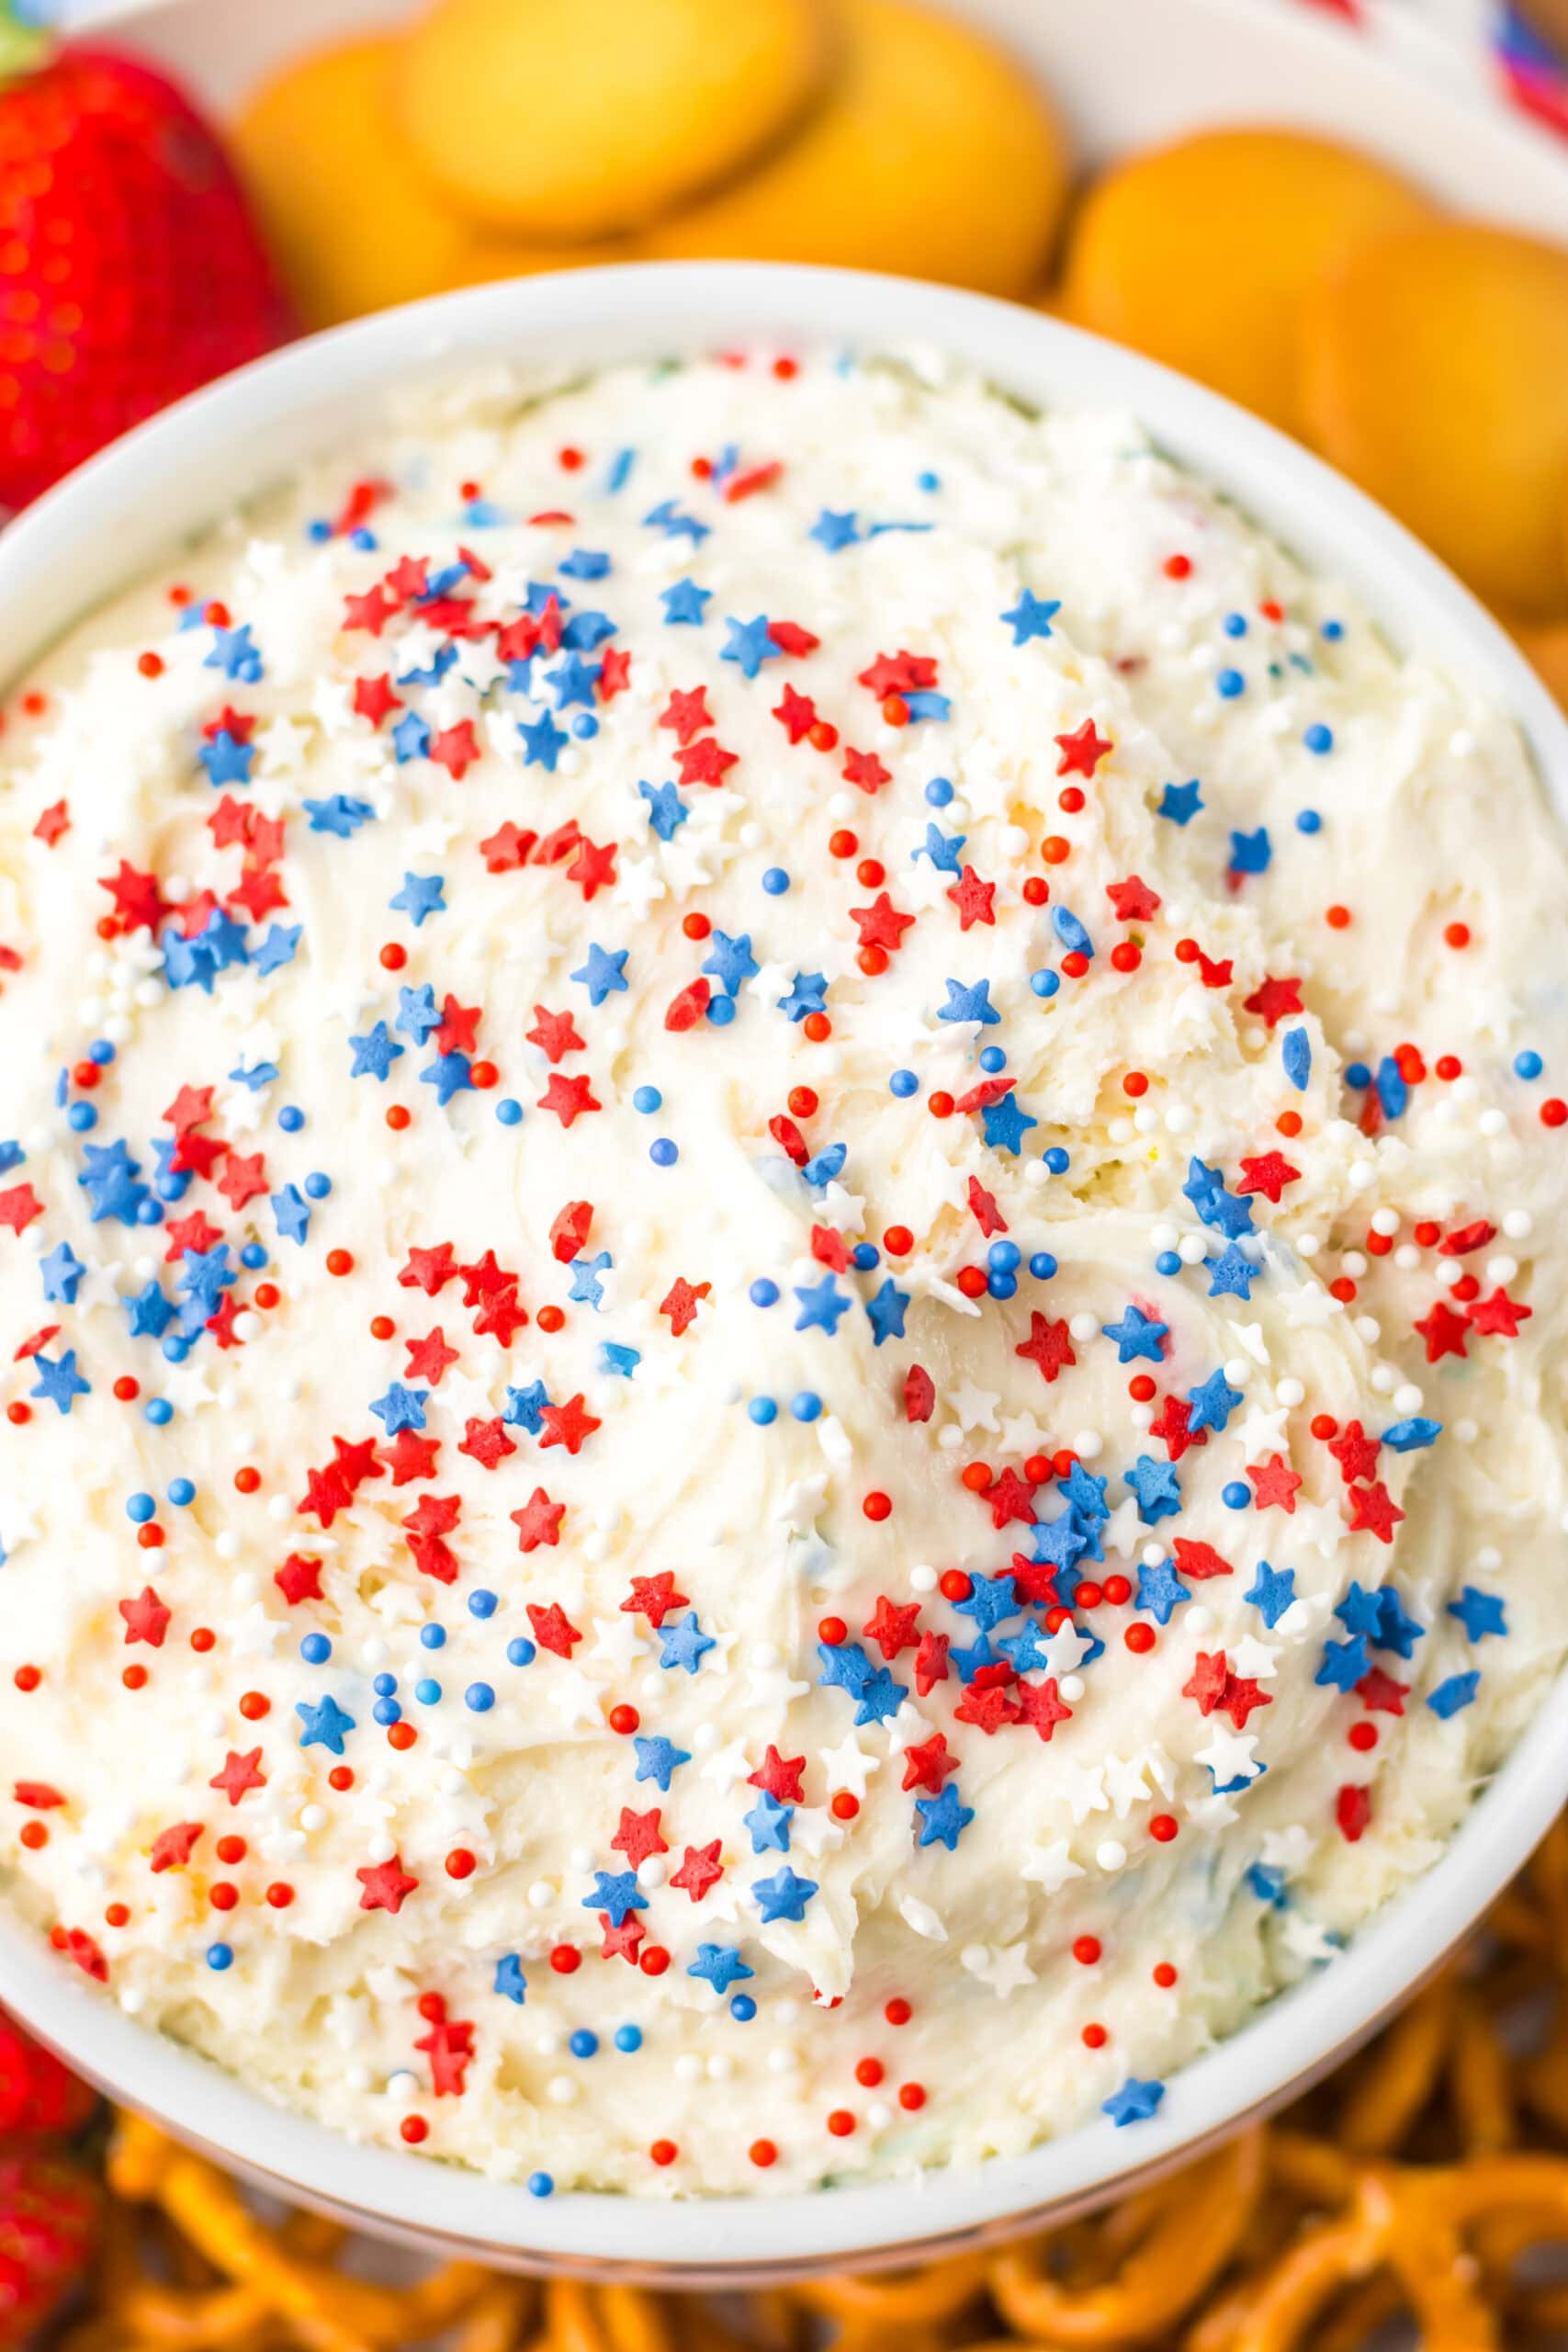 Red, white and blue dip with sprinkles.